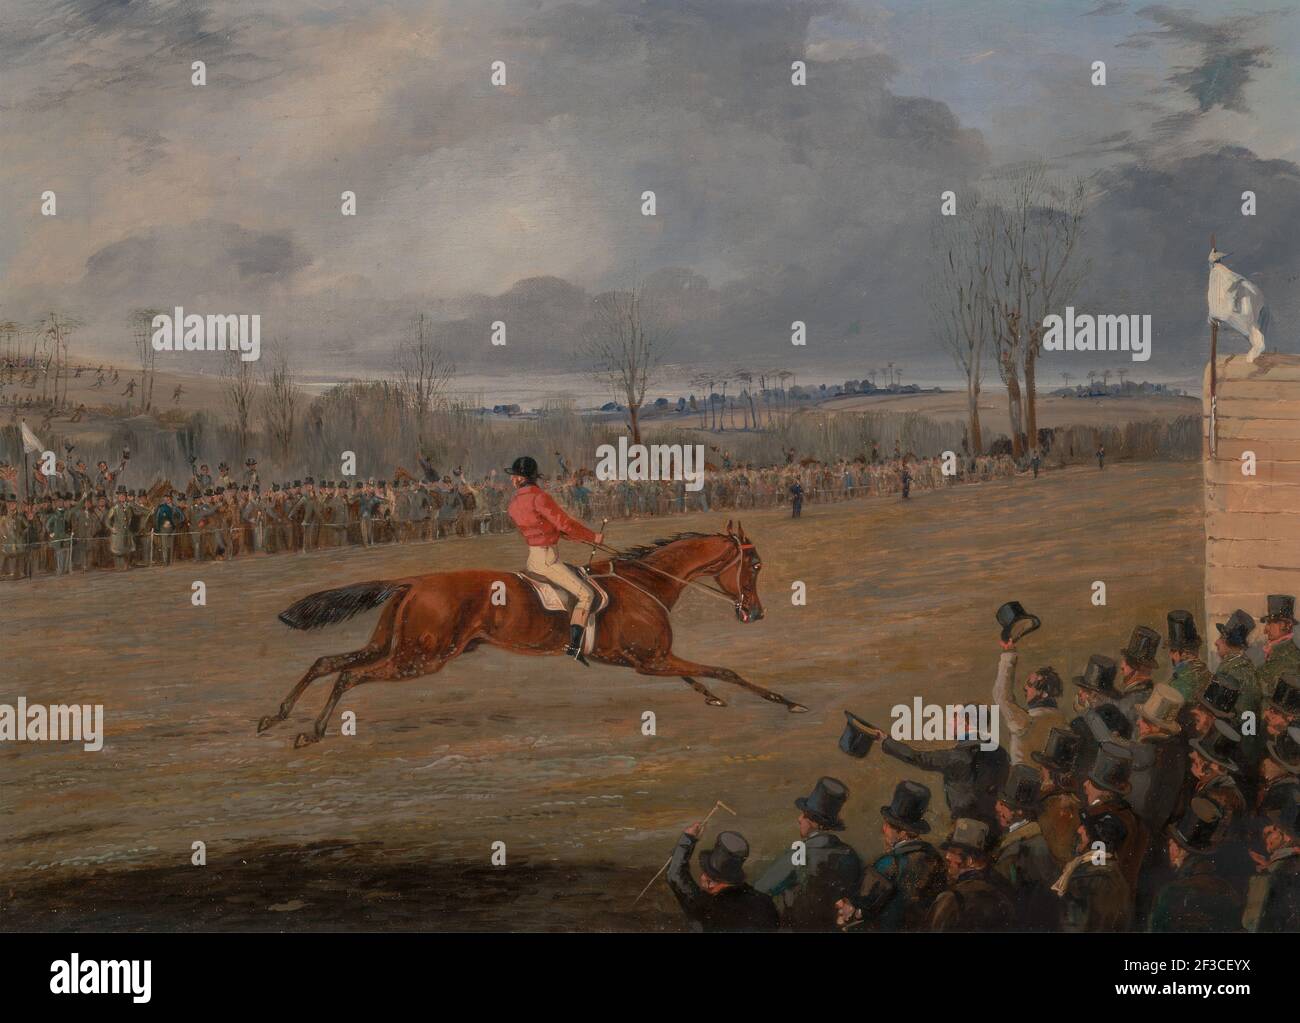 Scenes from a Steeplechase: The Winner;A Steeplechase: The Winner, ca. 1845. Stock Photo